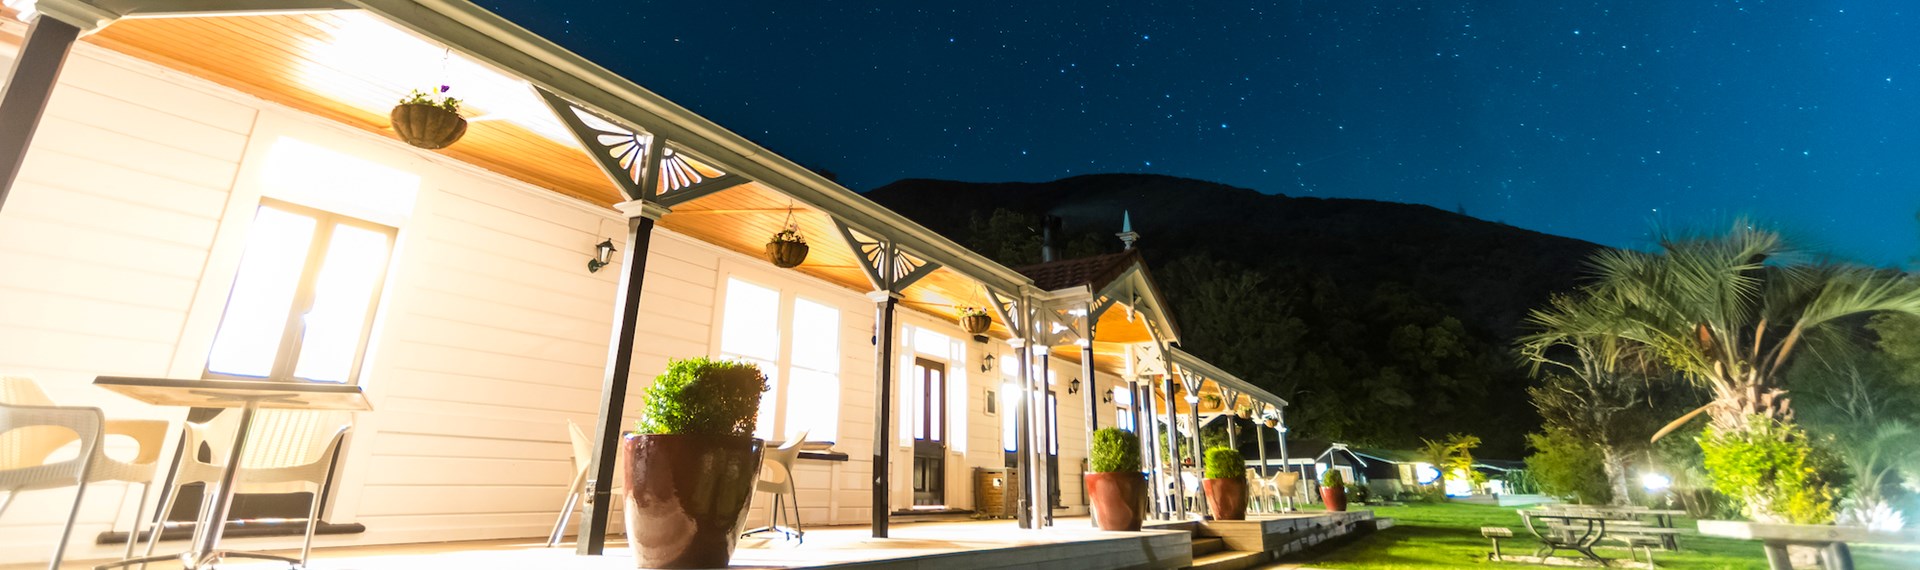 A view at night along the verandah of historic Howden House with lights on and stars in the sky, in the Marlborough Sounds at the top of New Zealand's South Island.